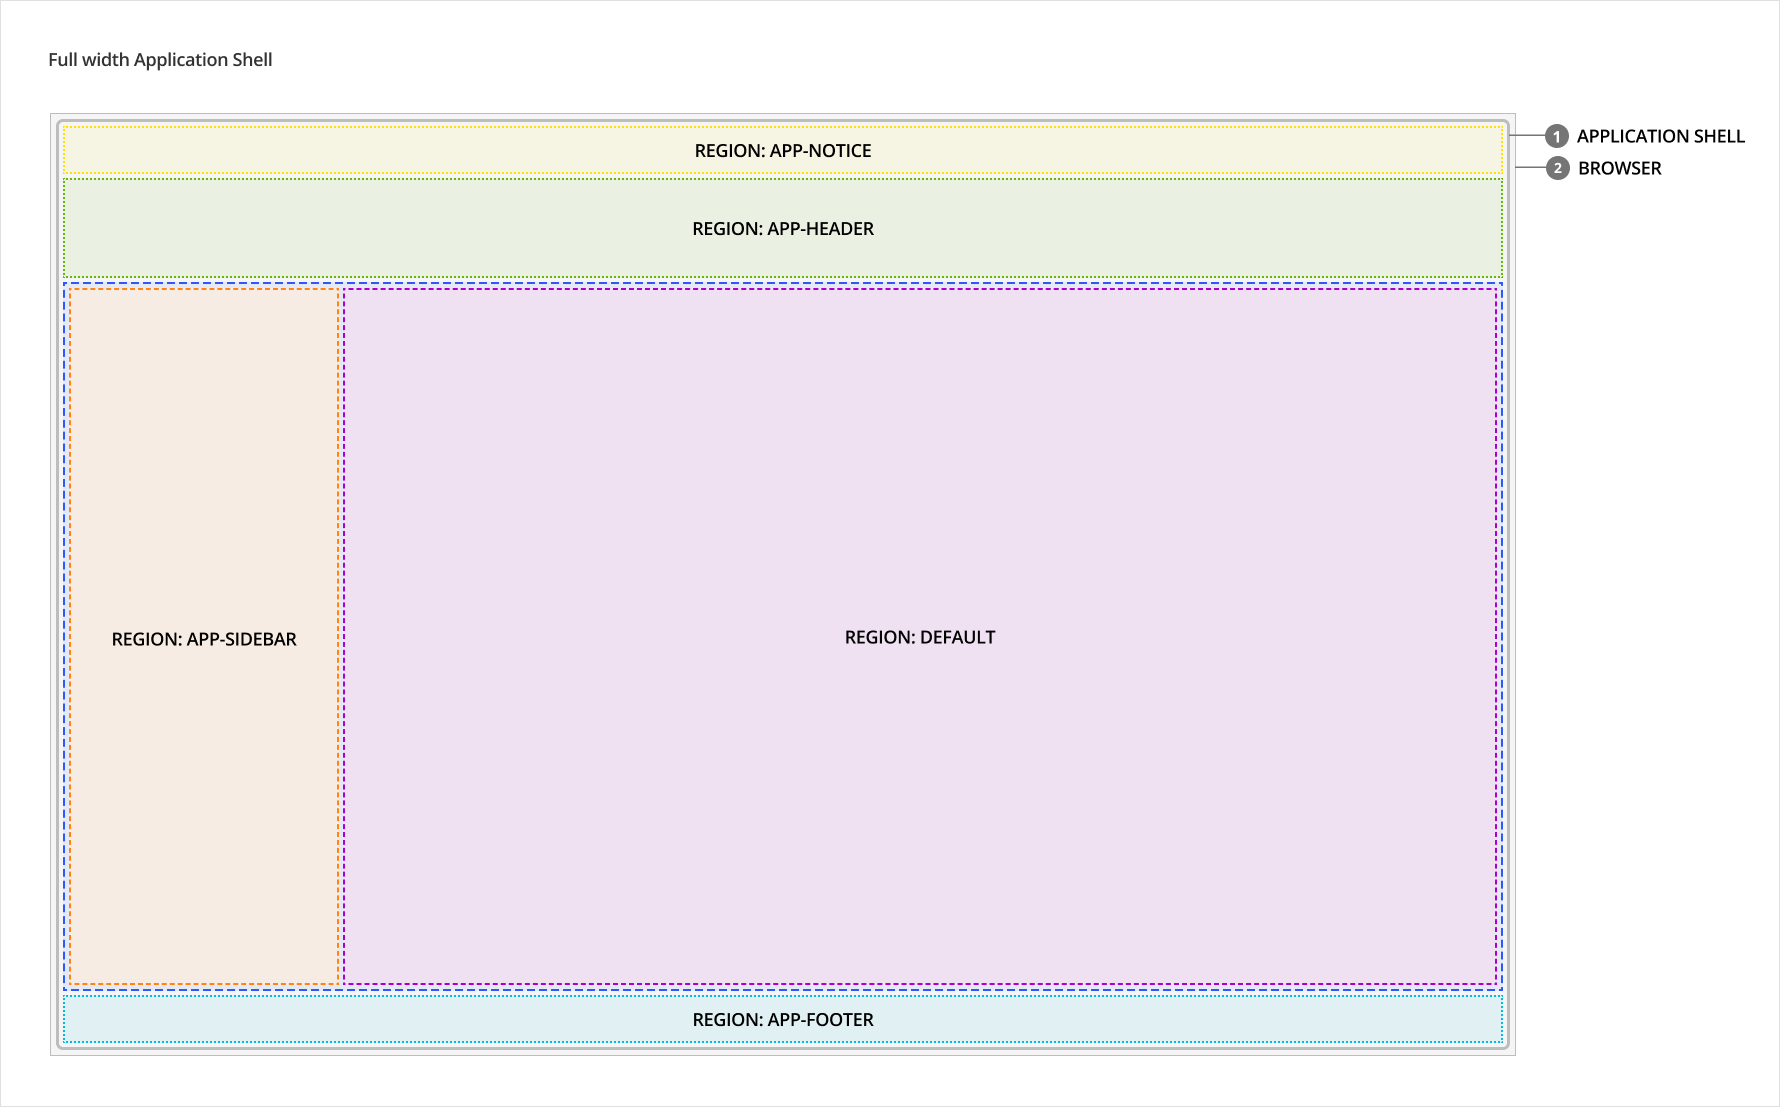 The full width application shell expands the entire width of the browser.